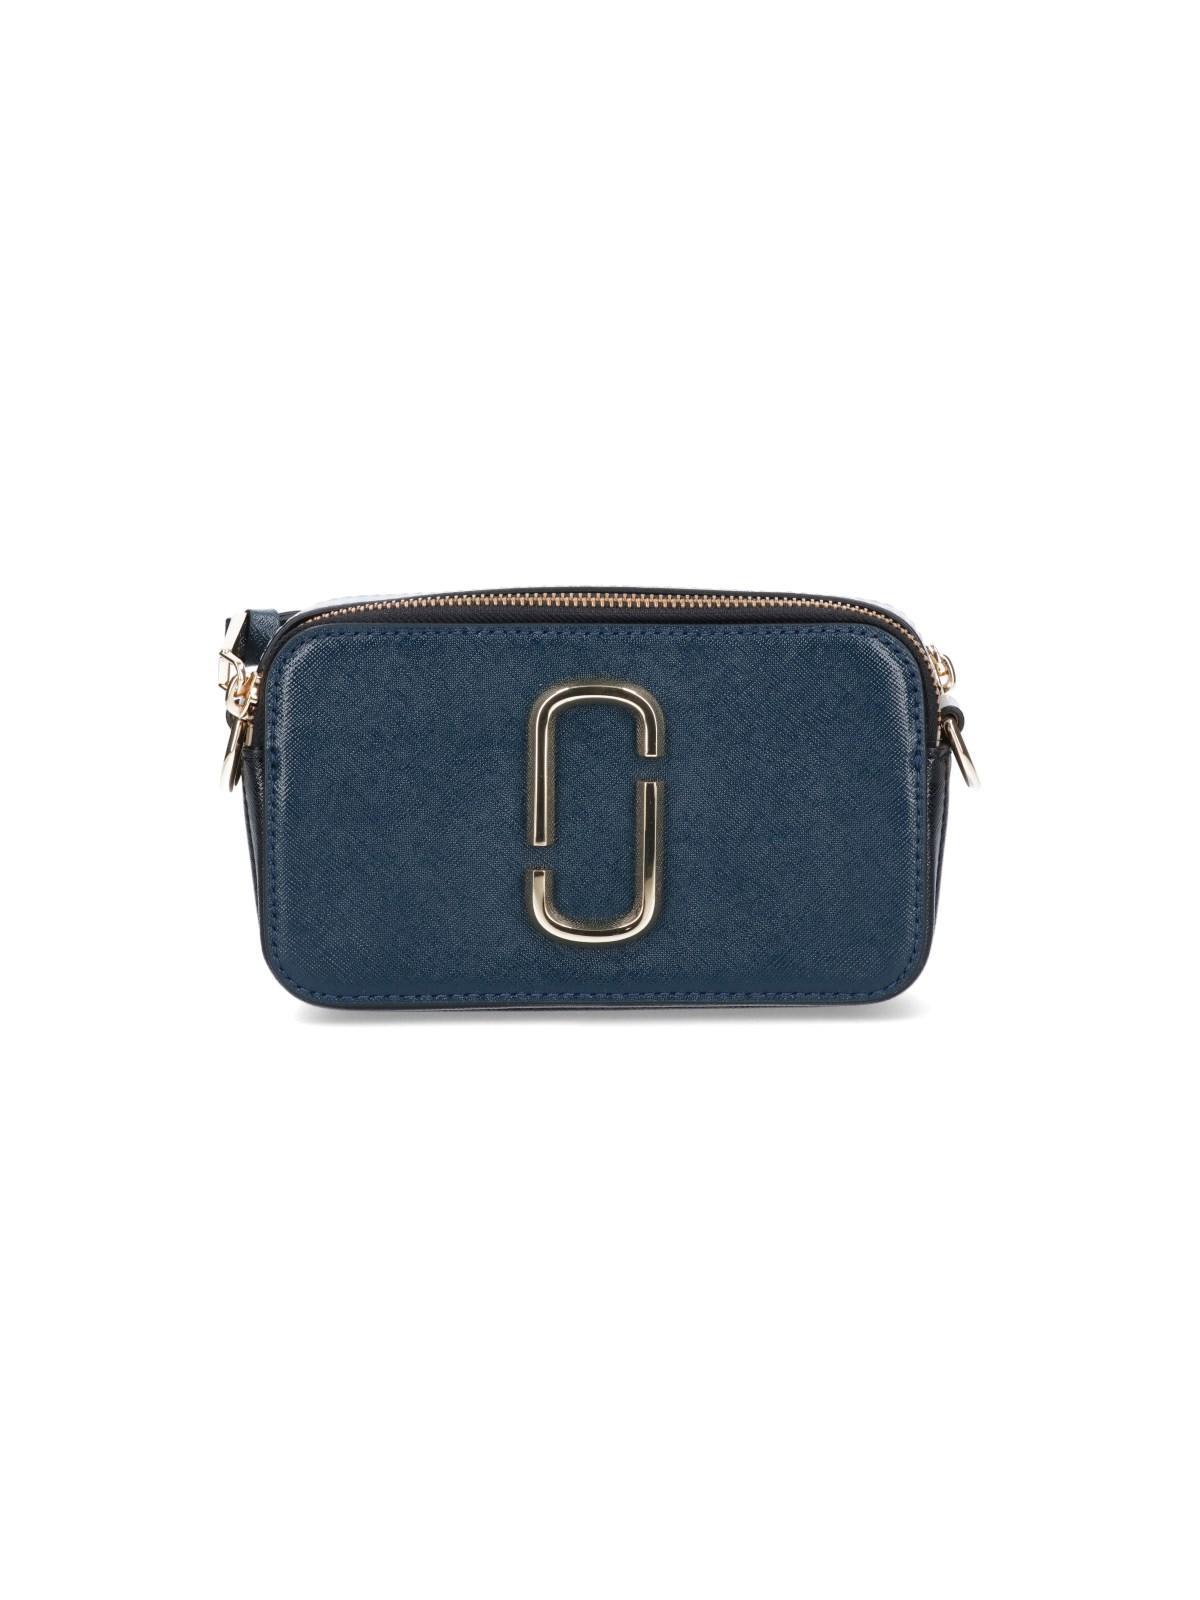 Marc Jacobs Snapshot DTM Camera Bag, Small - Blue, gold, red